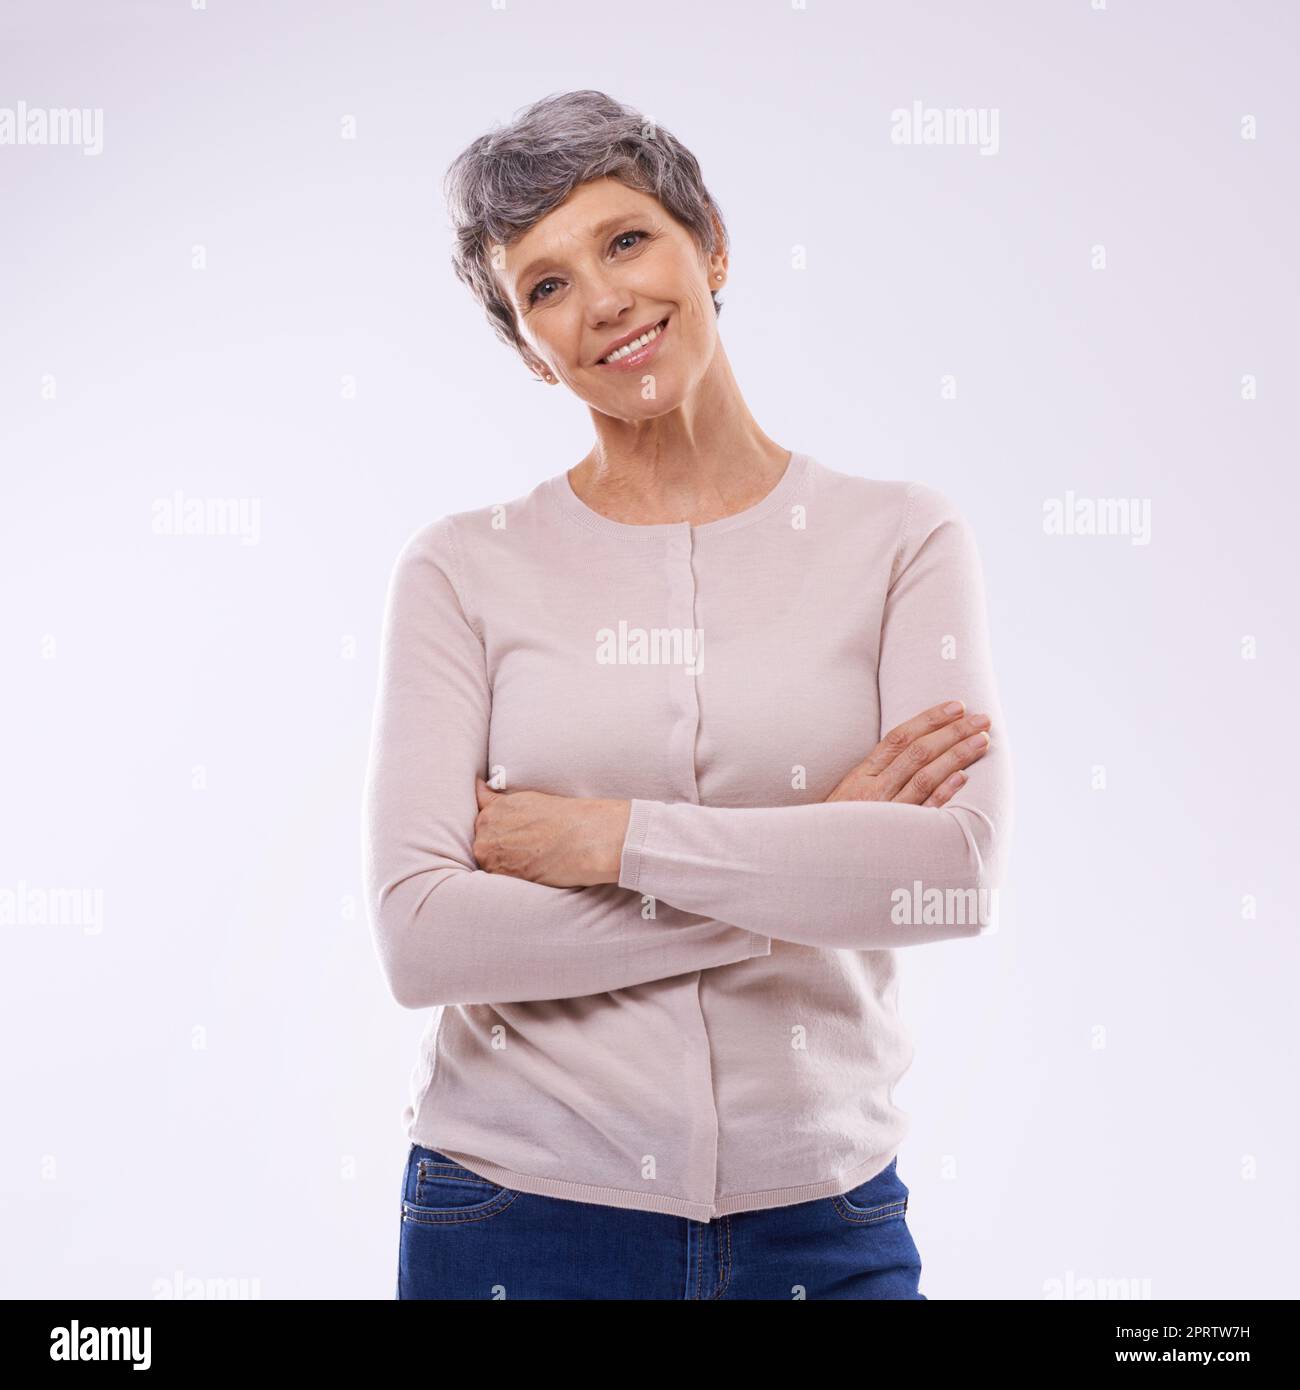 Self-assured maturity. Studio portrait of a happy mature woman against a white background. Stock Photo